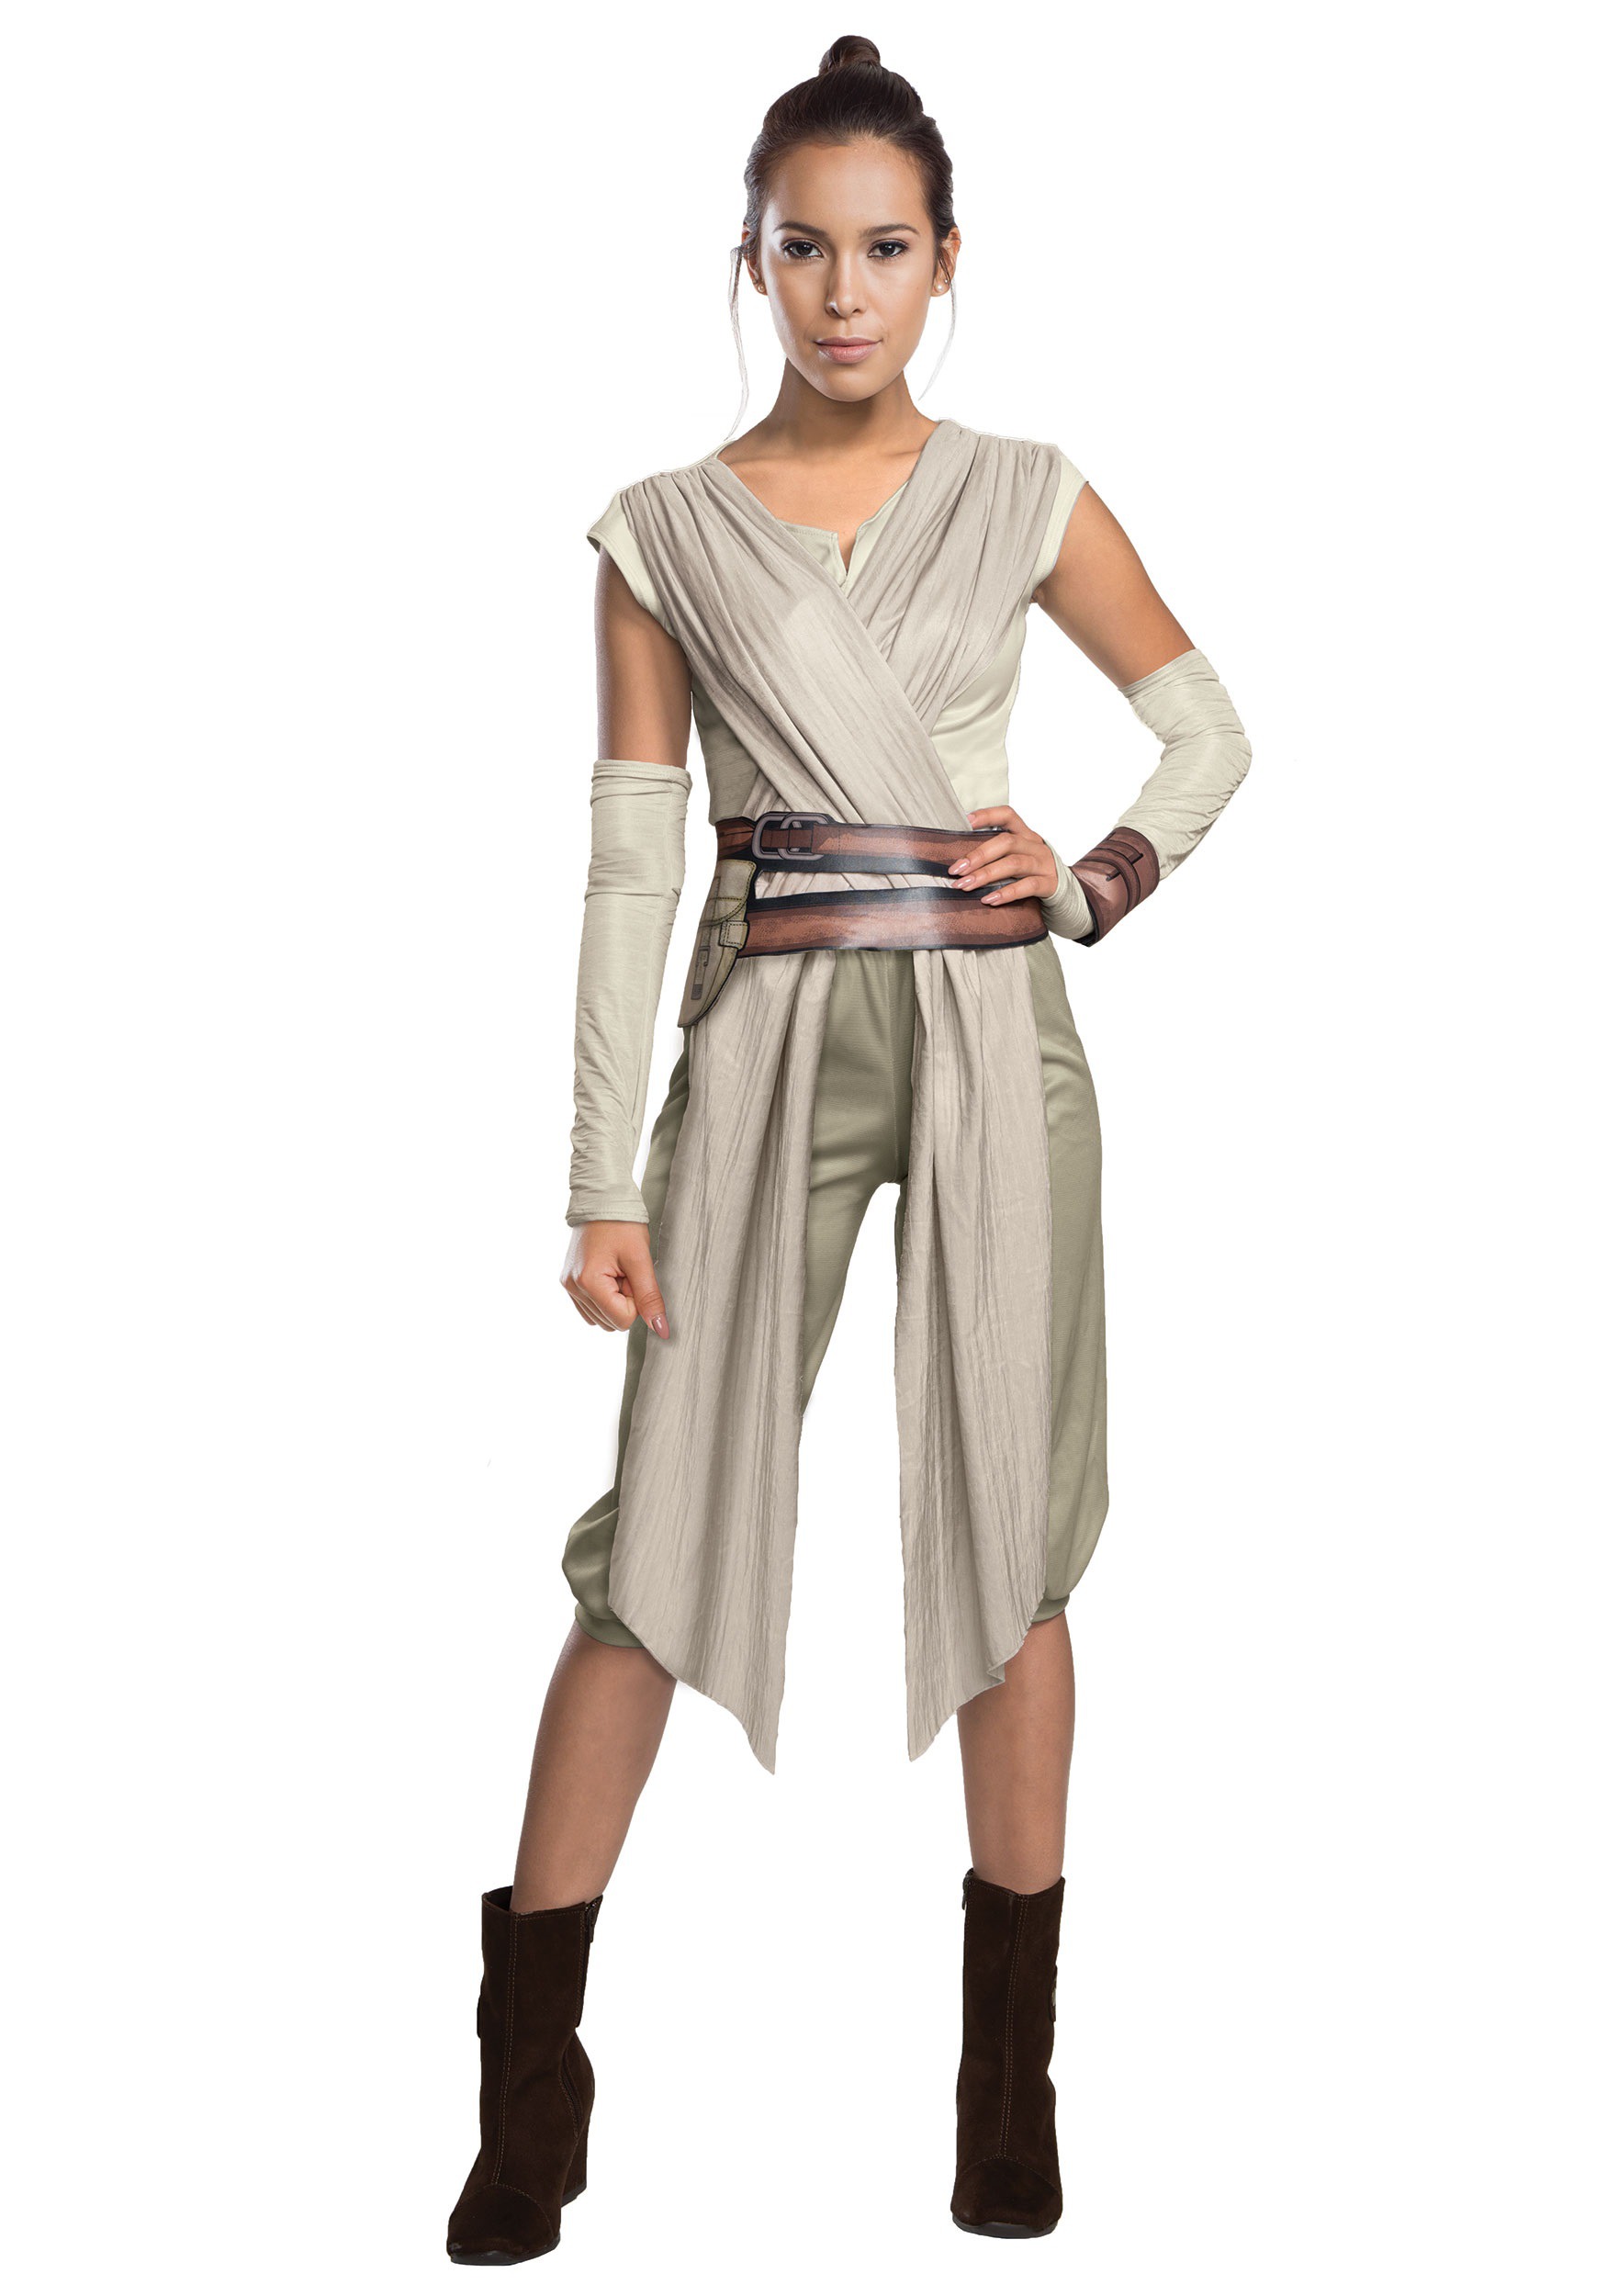 Make Halloween Amazing with Star Wars Family Costumes!